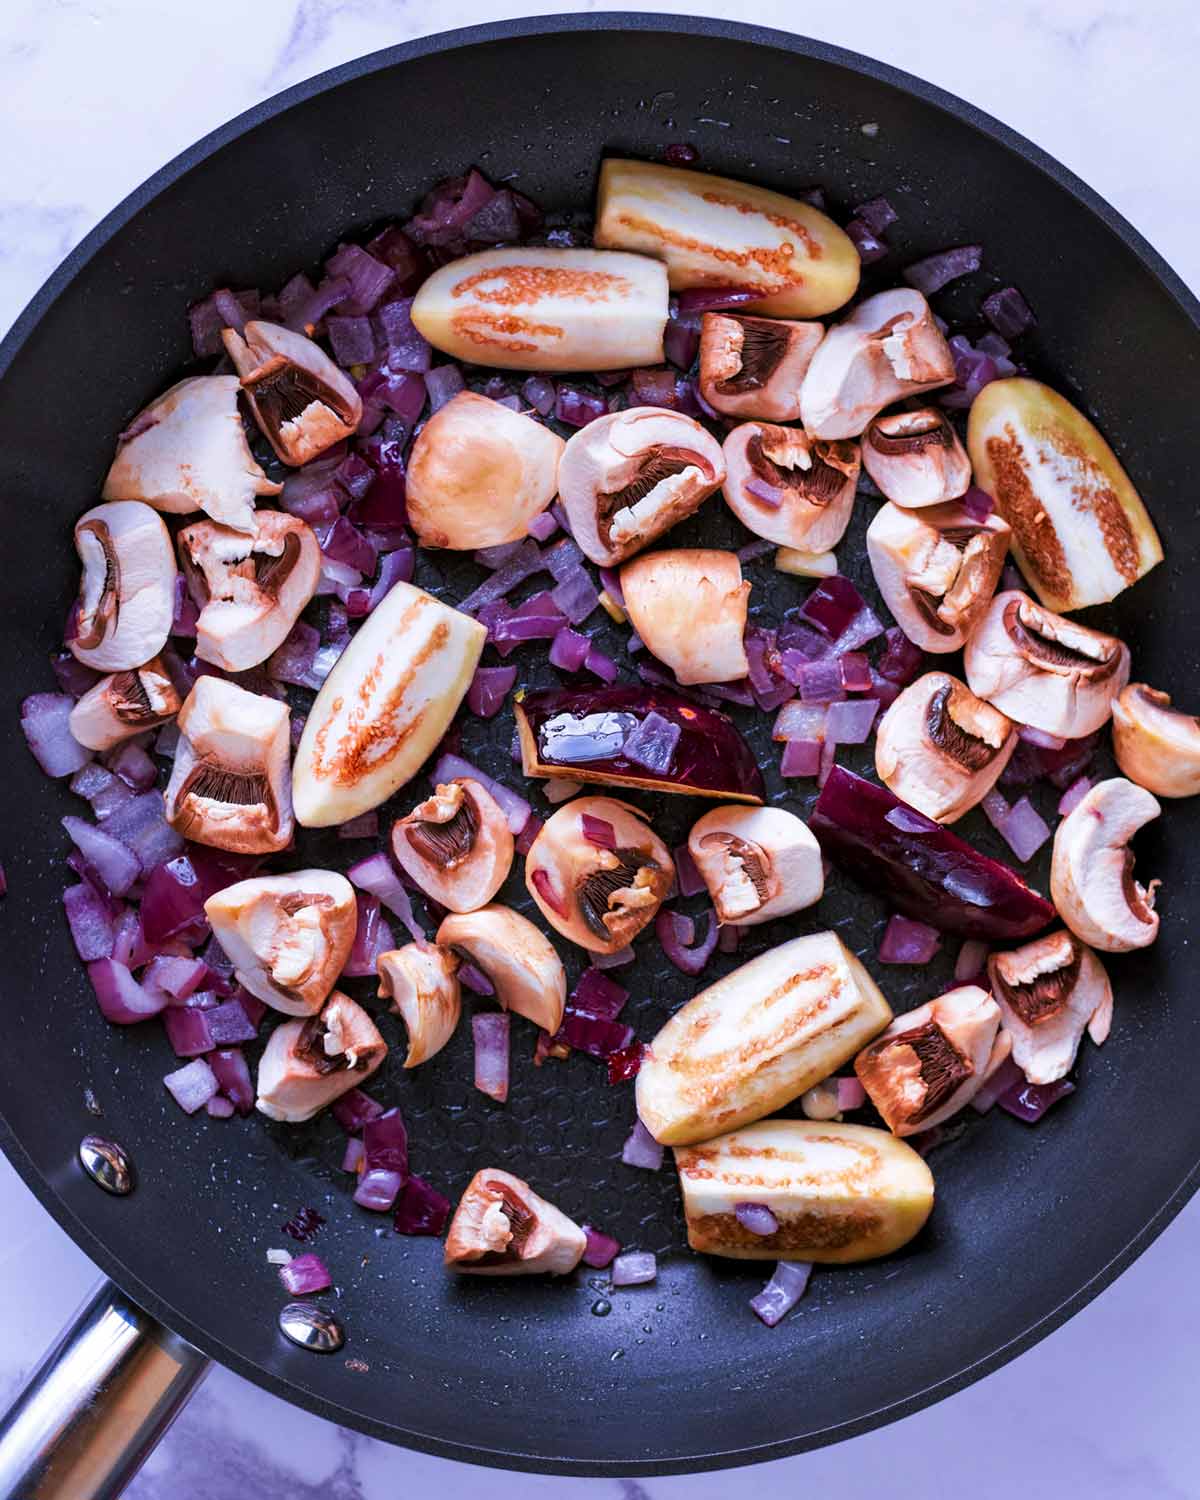 Red onion, chopped mushrooms and baby aubergines cooking in a pan.